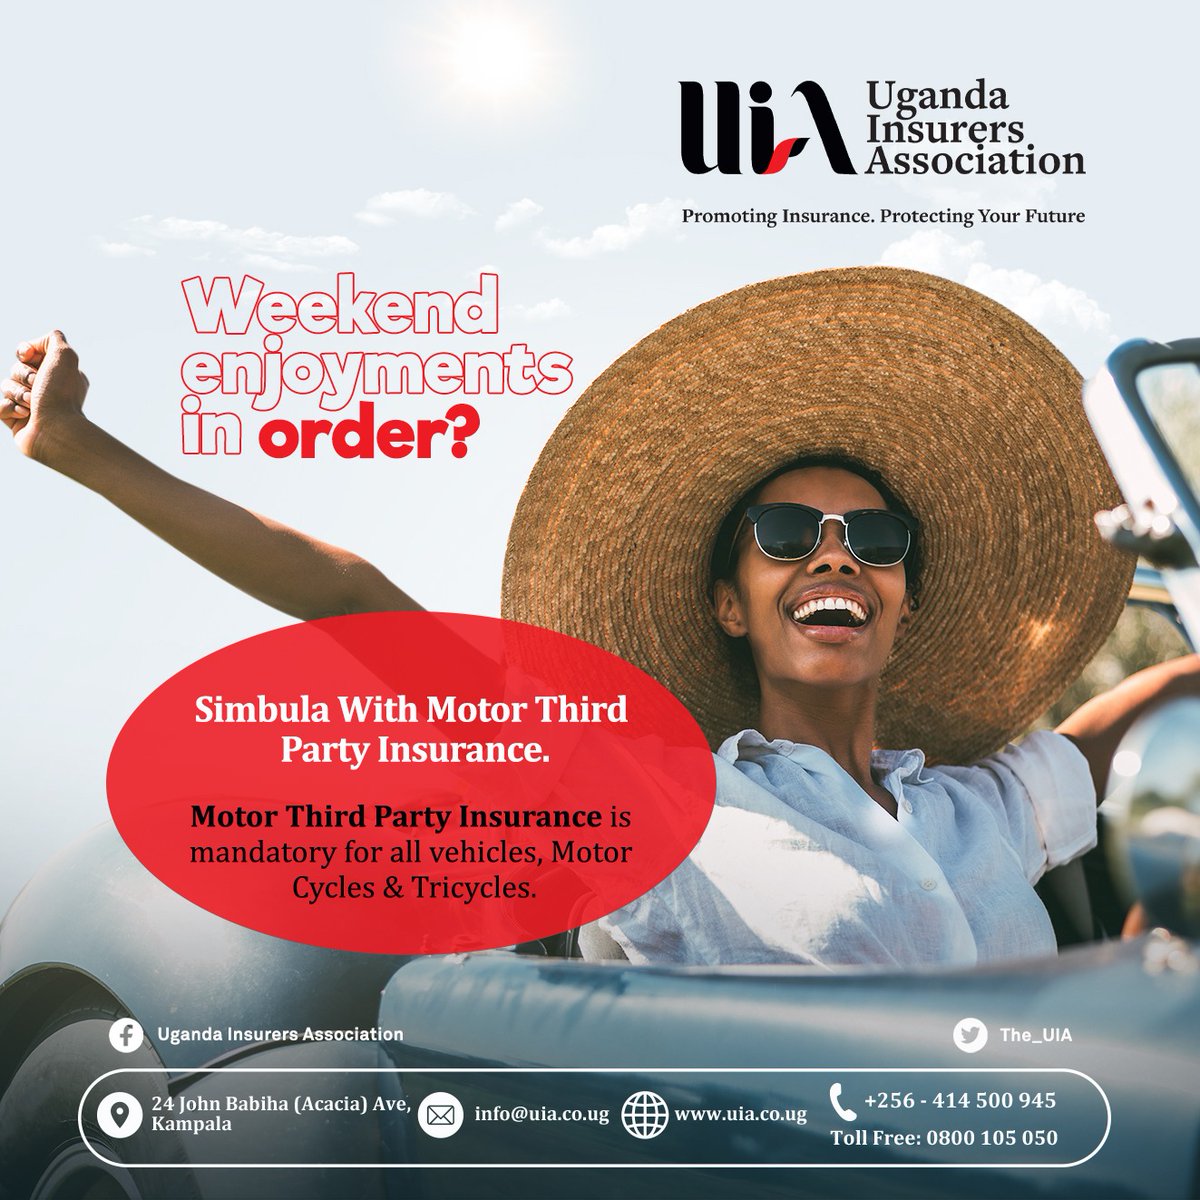 You are always in good hands with Motor Third Party Insurance!

Simbula this weekend with Motor Third Party Insurance.

#UIA #SimbulaWithMTP #MotorThirdParty #InsuranceCover #Weekendvibes #Enjoyments #SafeandSecure #fridayvibes #PromotingInsurance